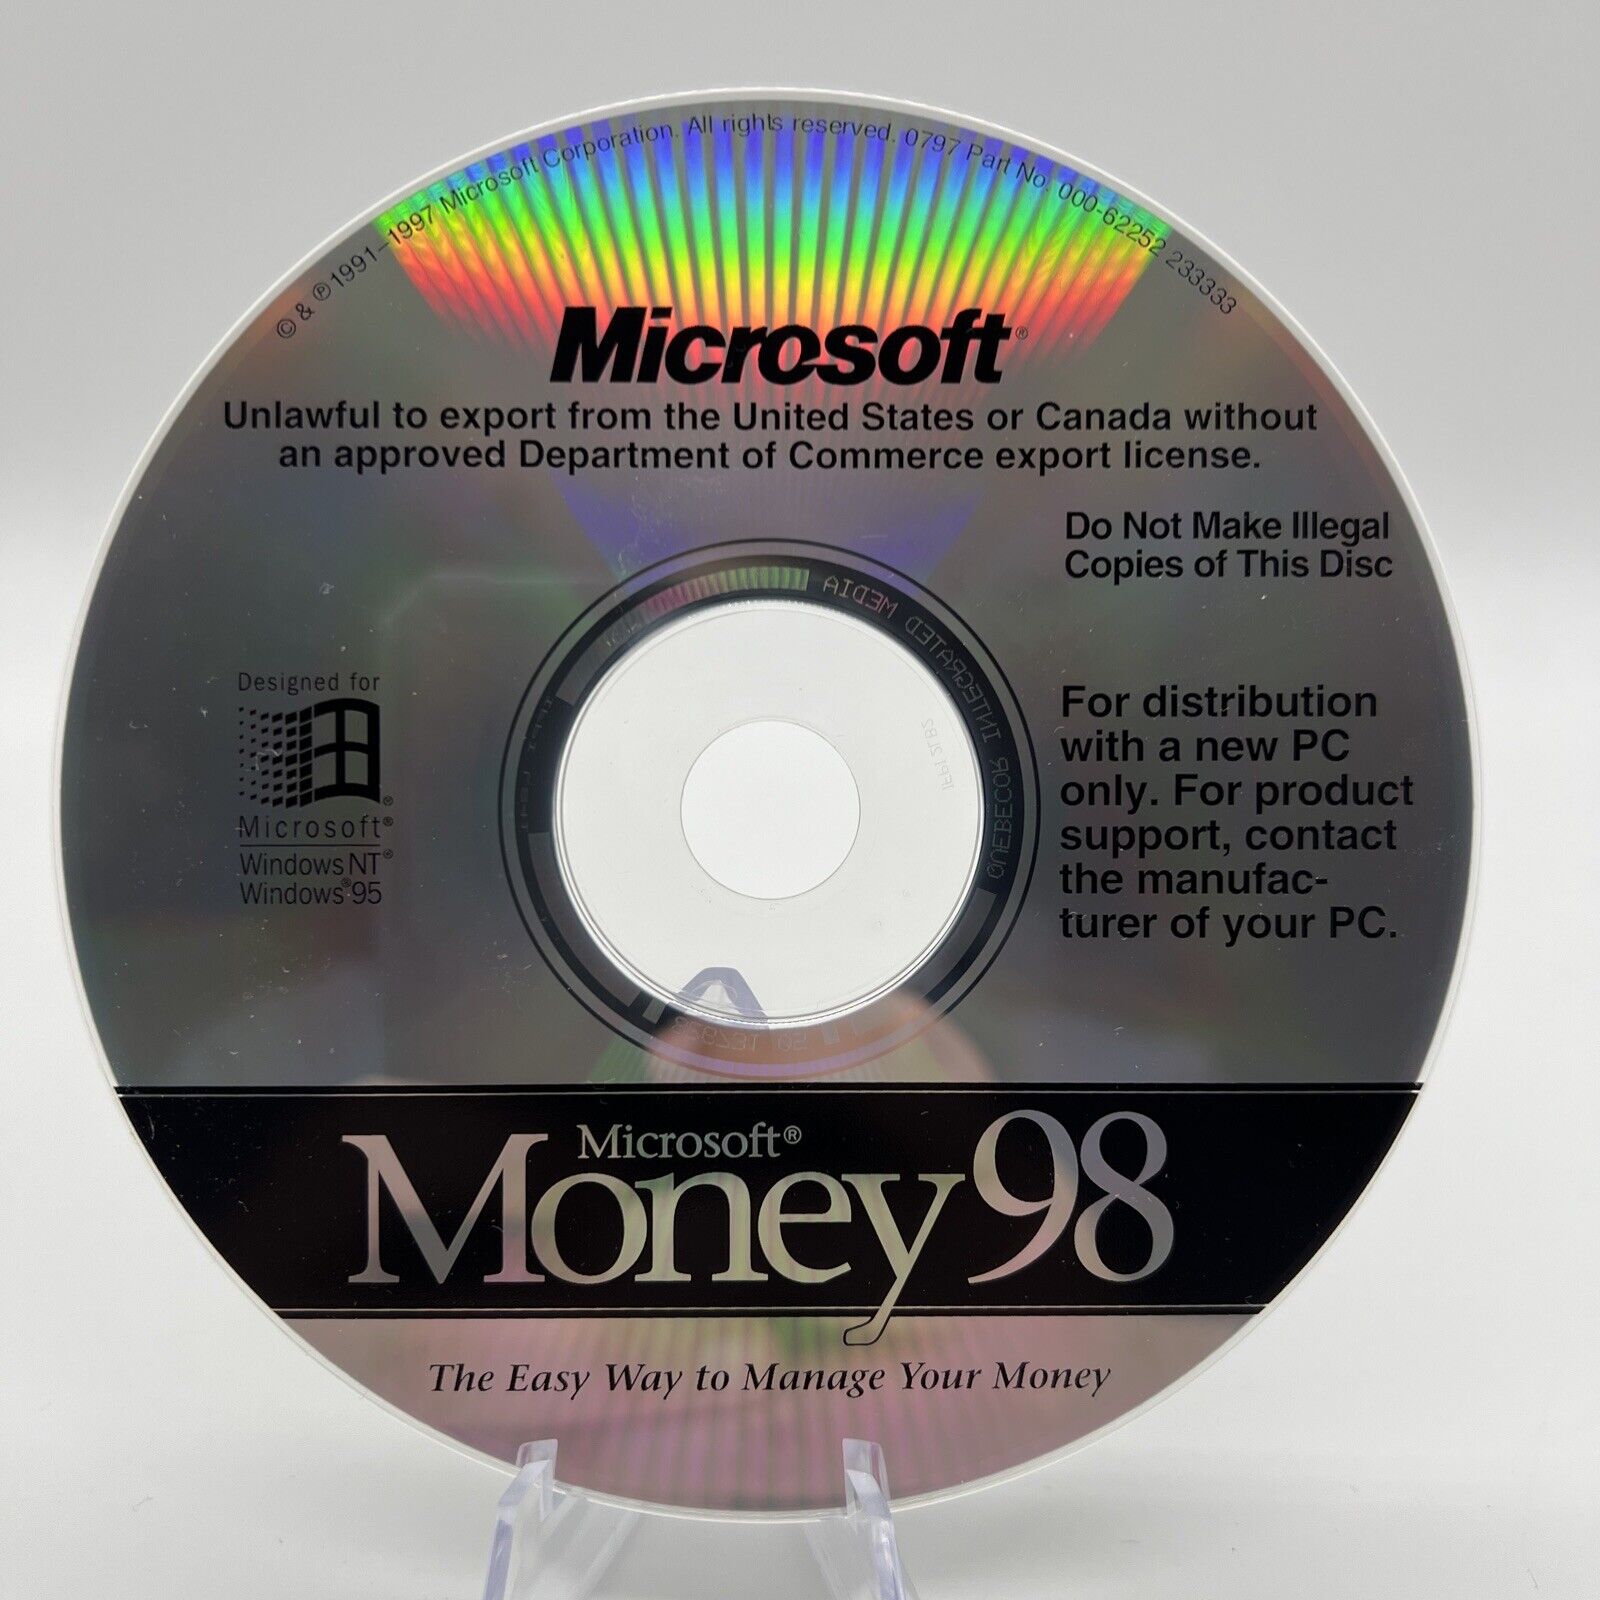 MICROSOFT MONEY 98 CD - Vintage Finance Software DISC ONLY NO PRODUCT KEY NO BOX